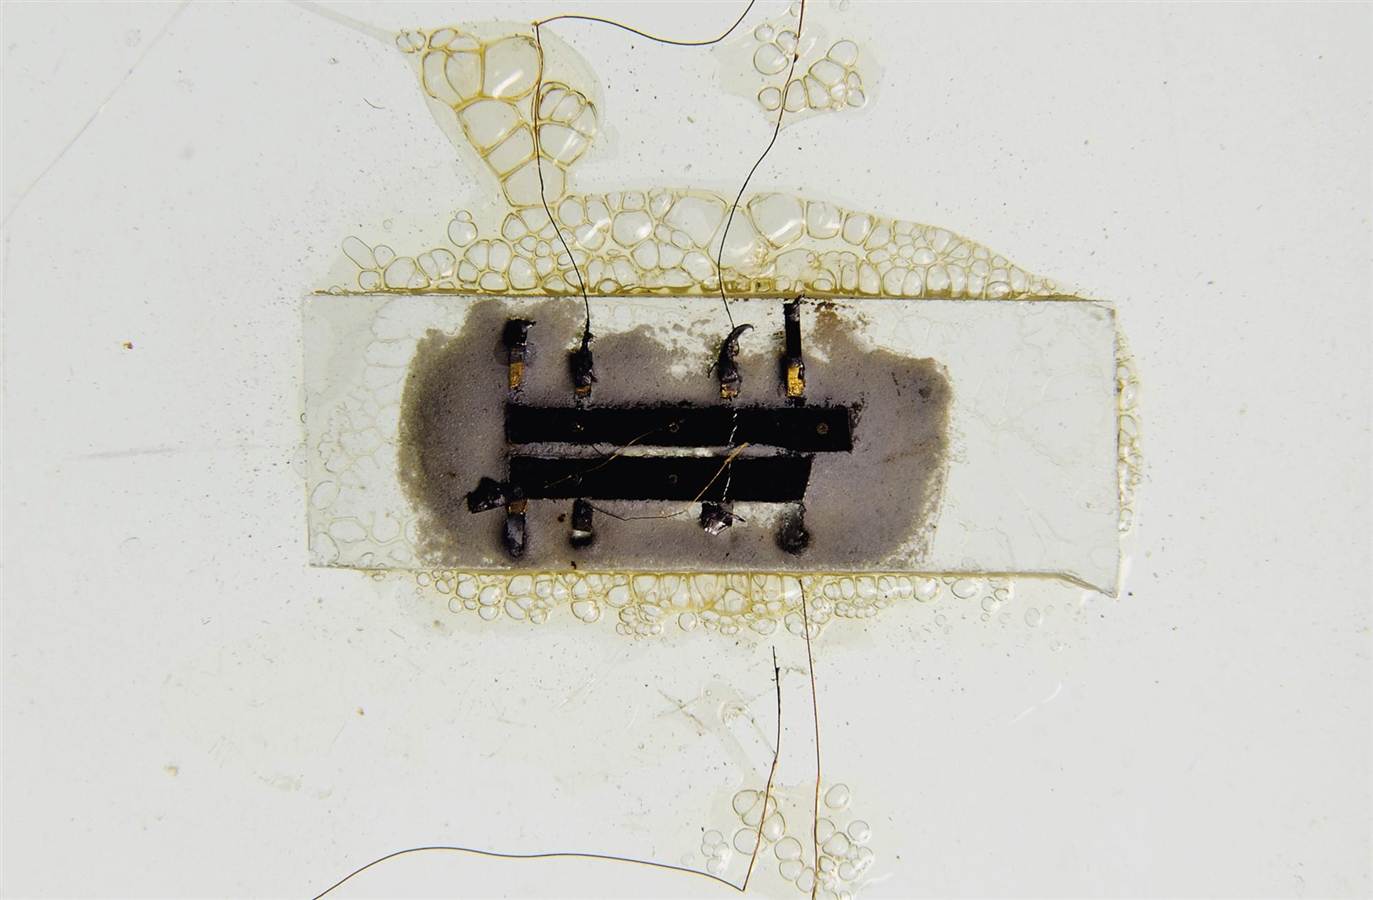 The First Microchip Handmade in 1958 by Jack Kilby